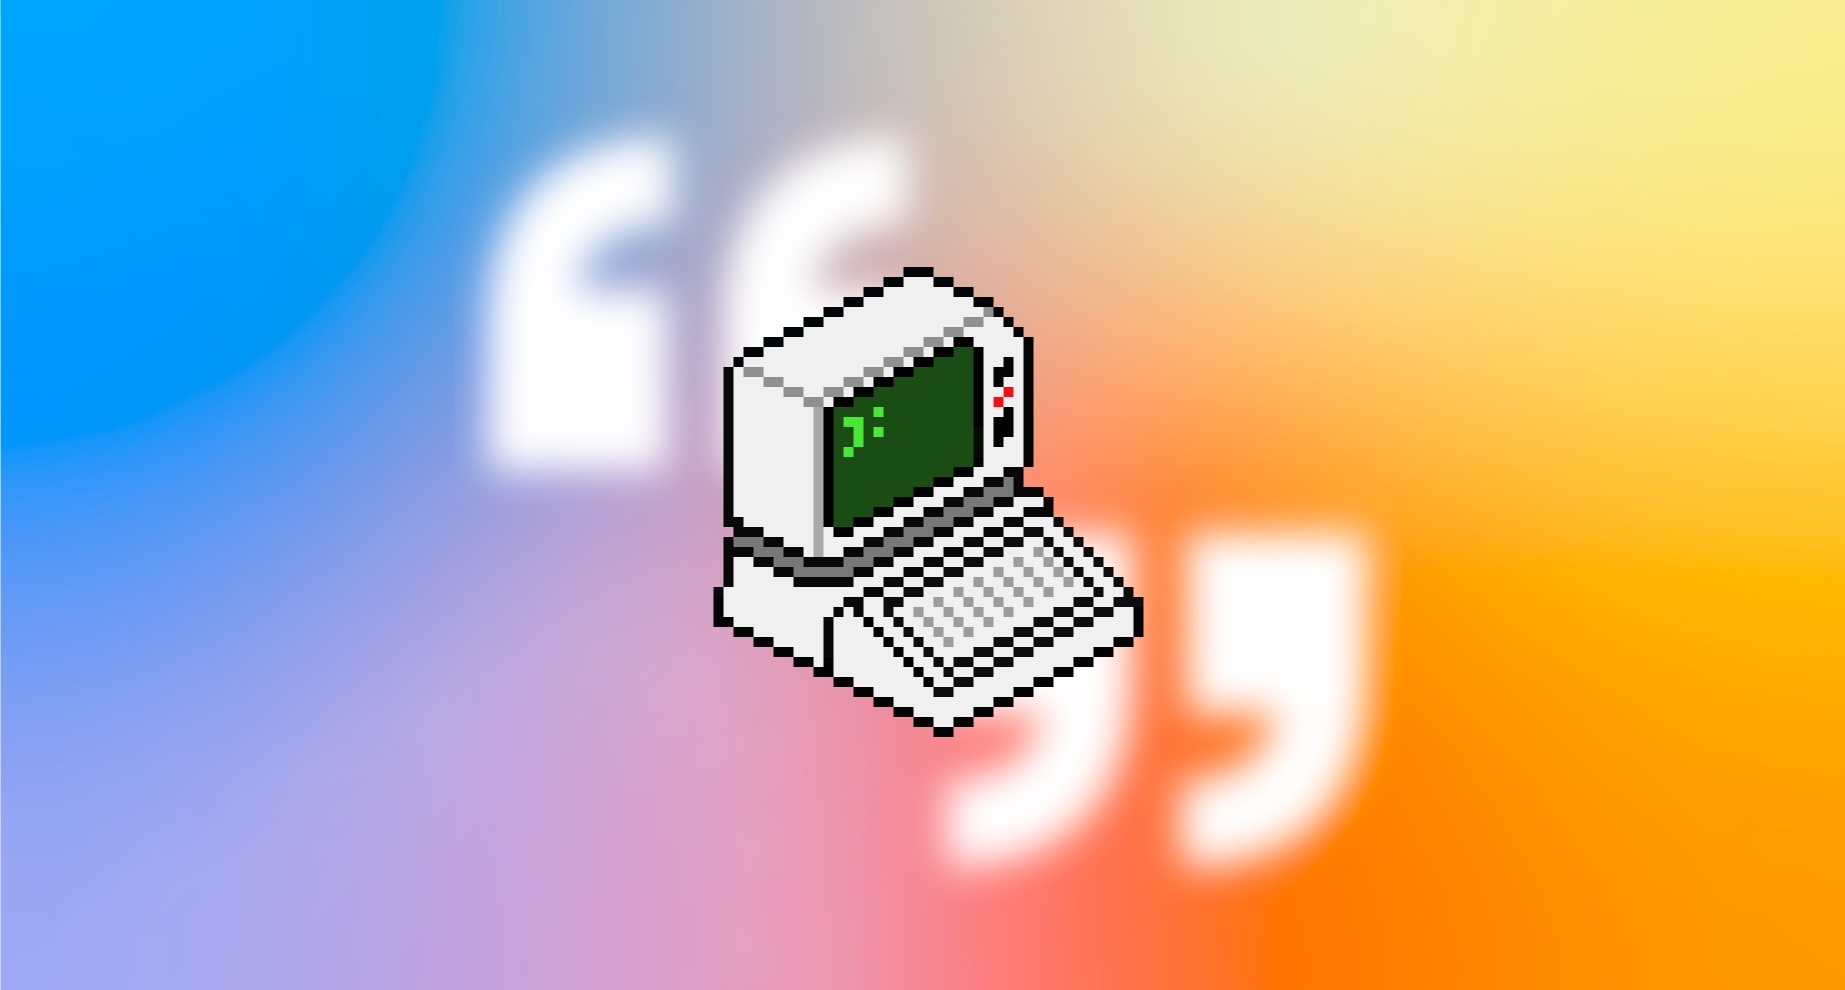 A classic computer icon surrounded by quote marks